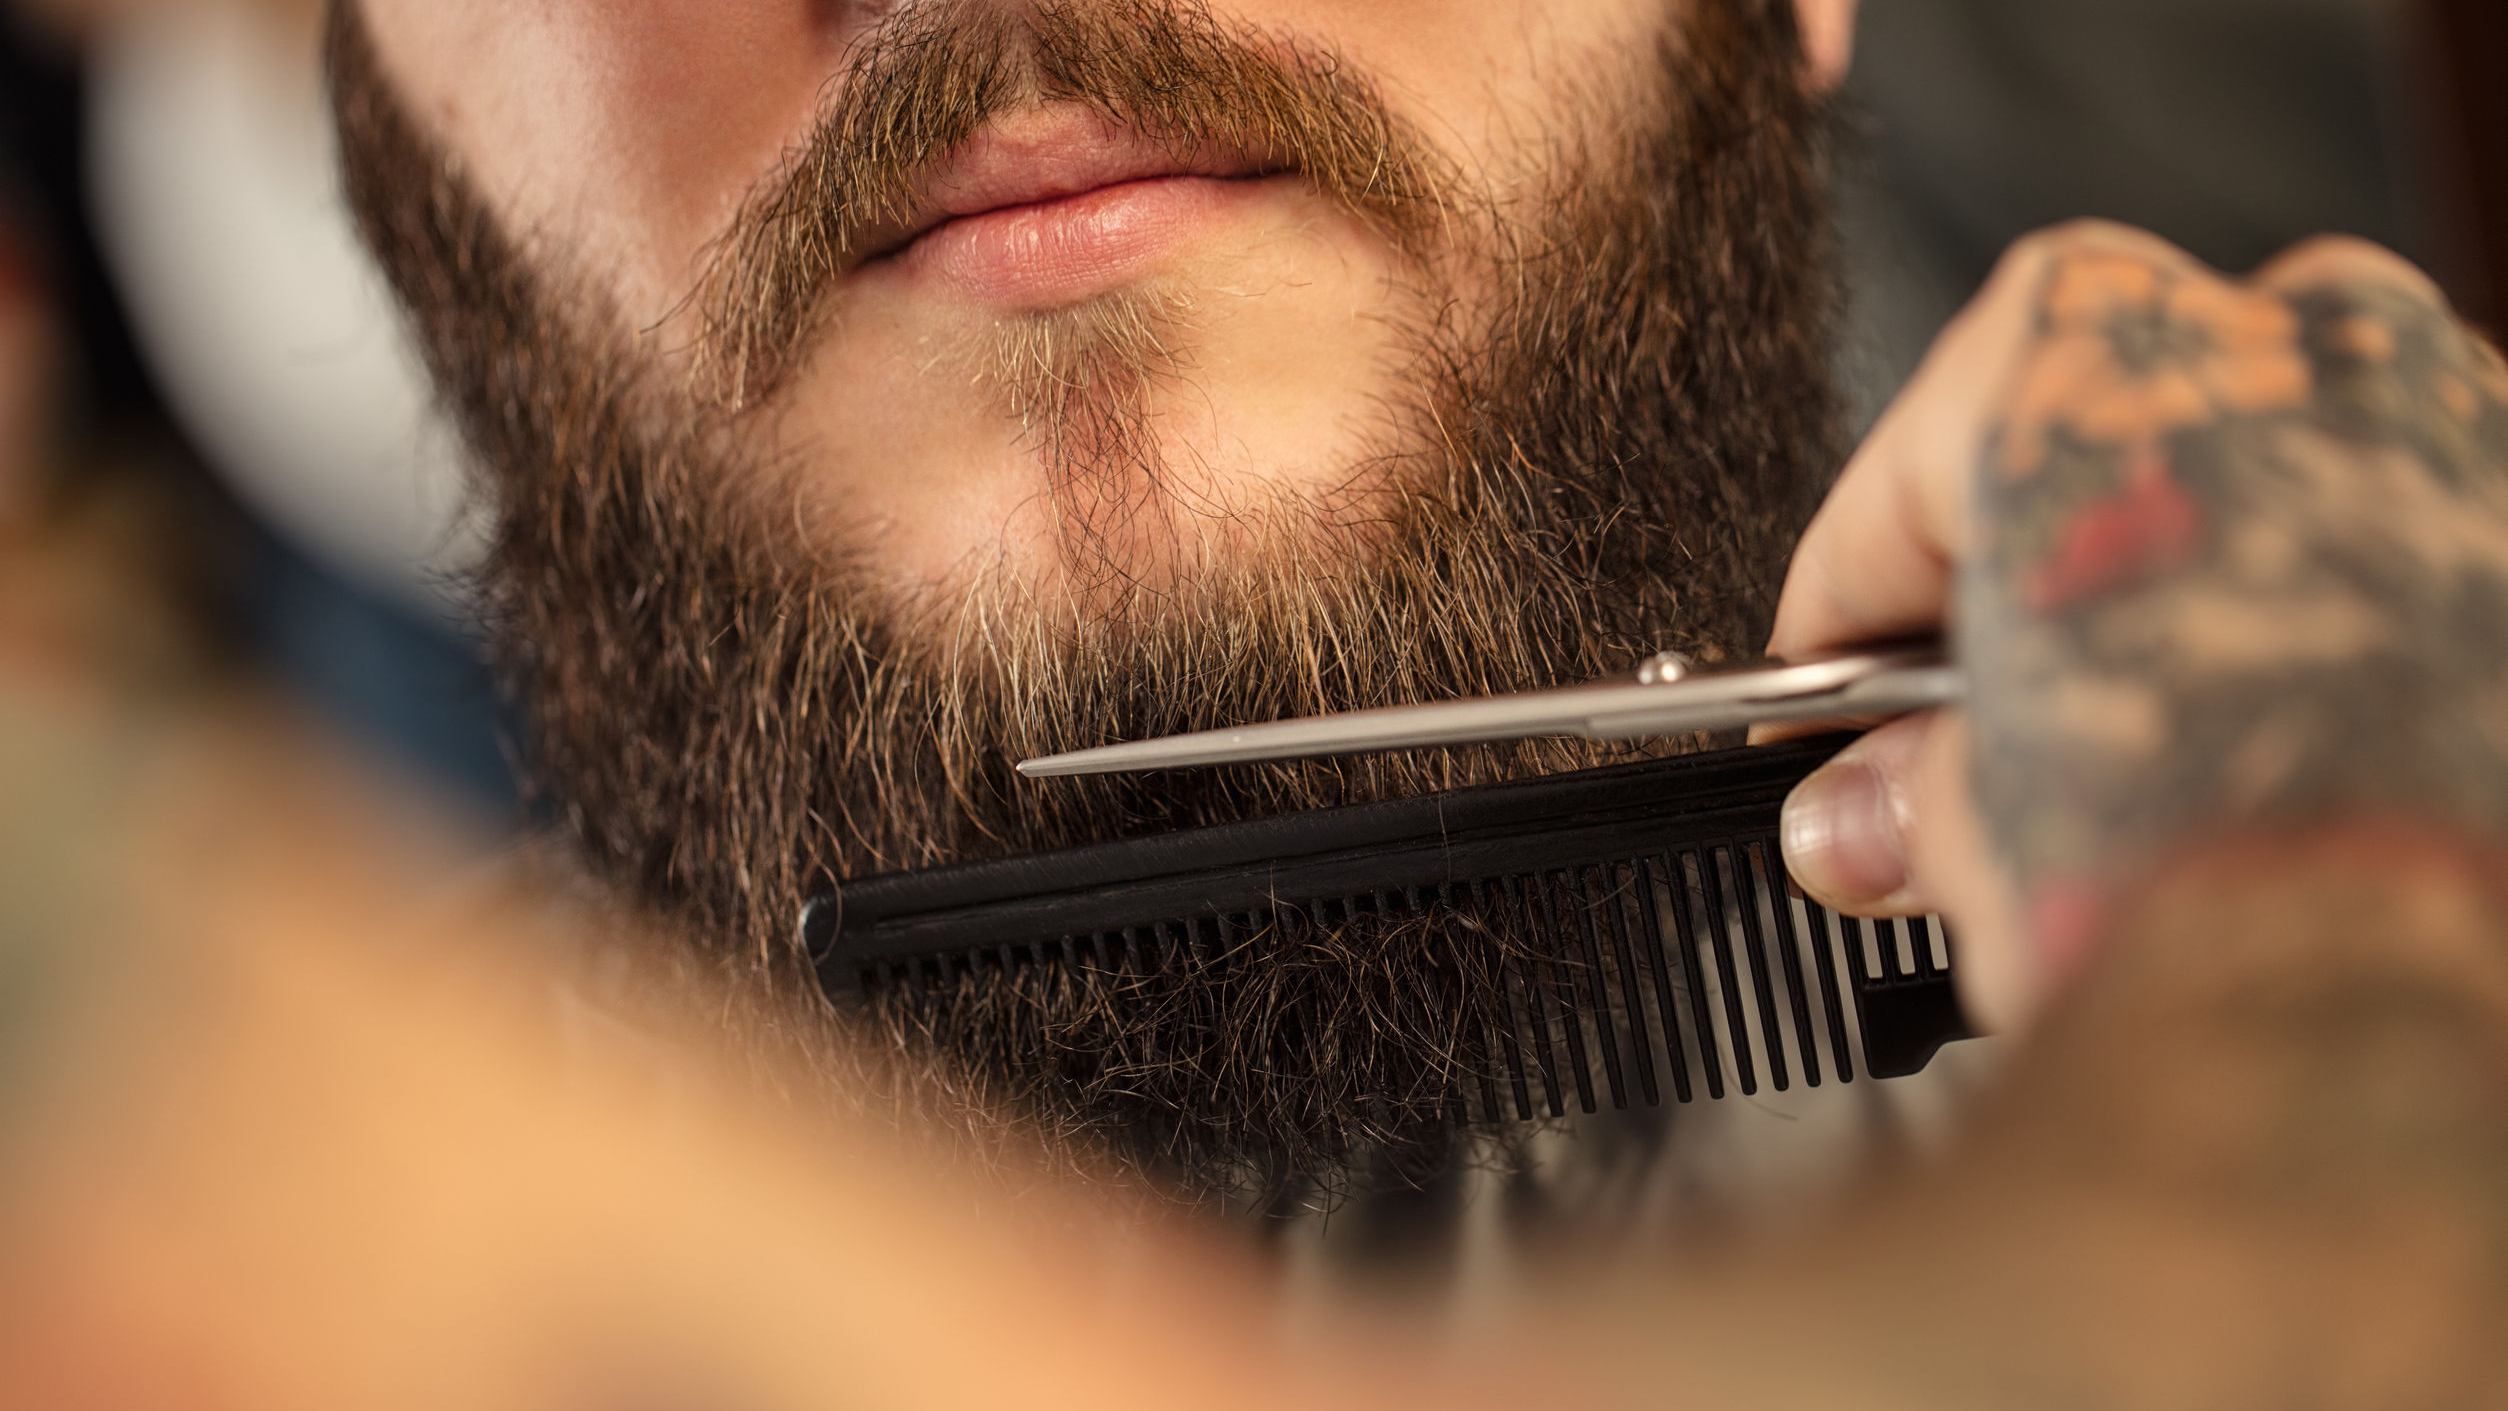 Beard trimming and types of beards trimmed at HMX